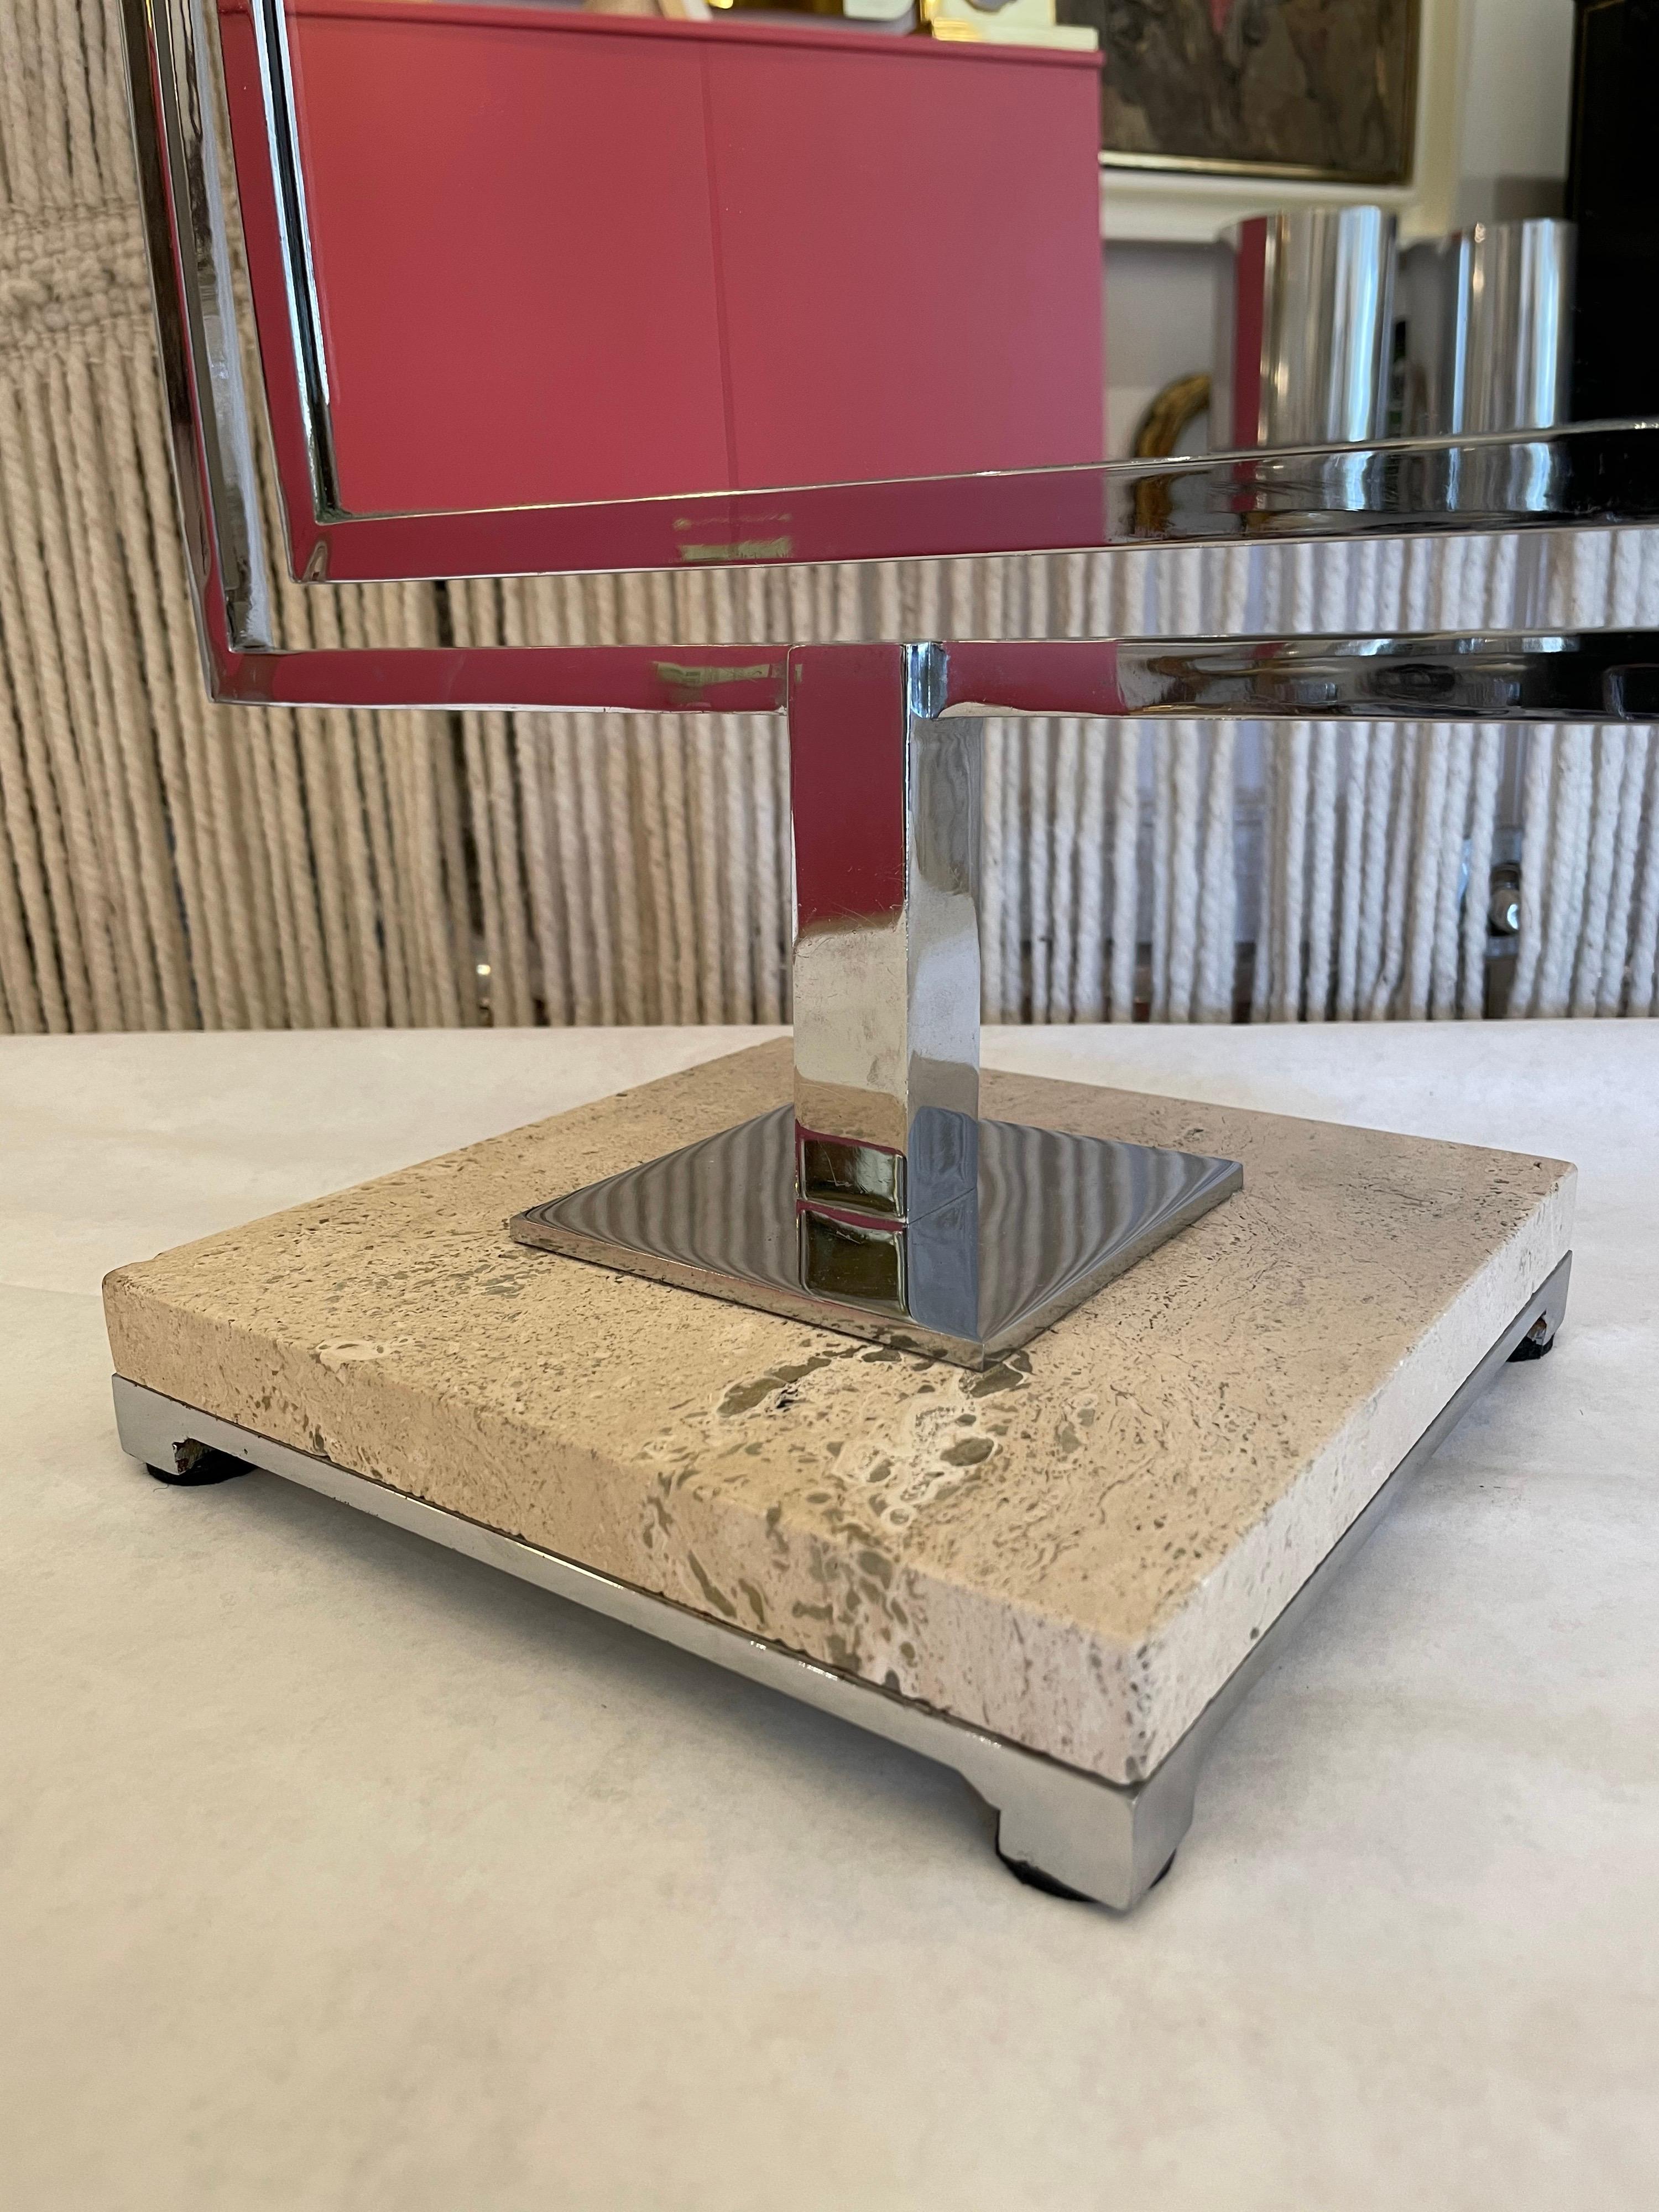 This is a two-sided vanity table top mirror with travertine and chrome base. It swivels easily and is very heavy for extra stability.